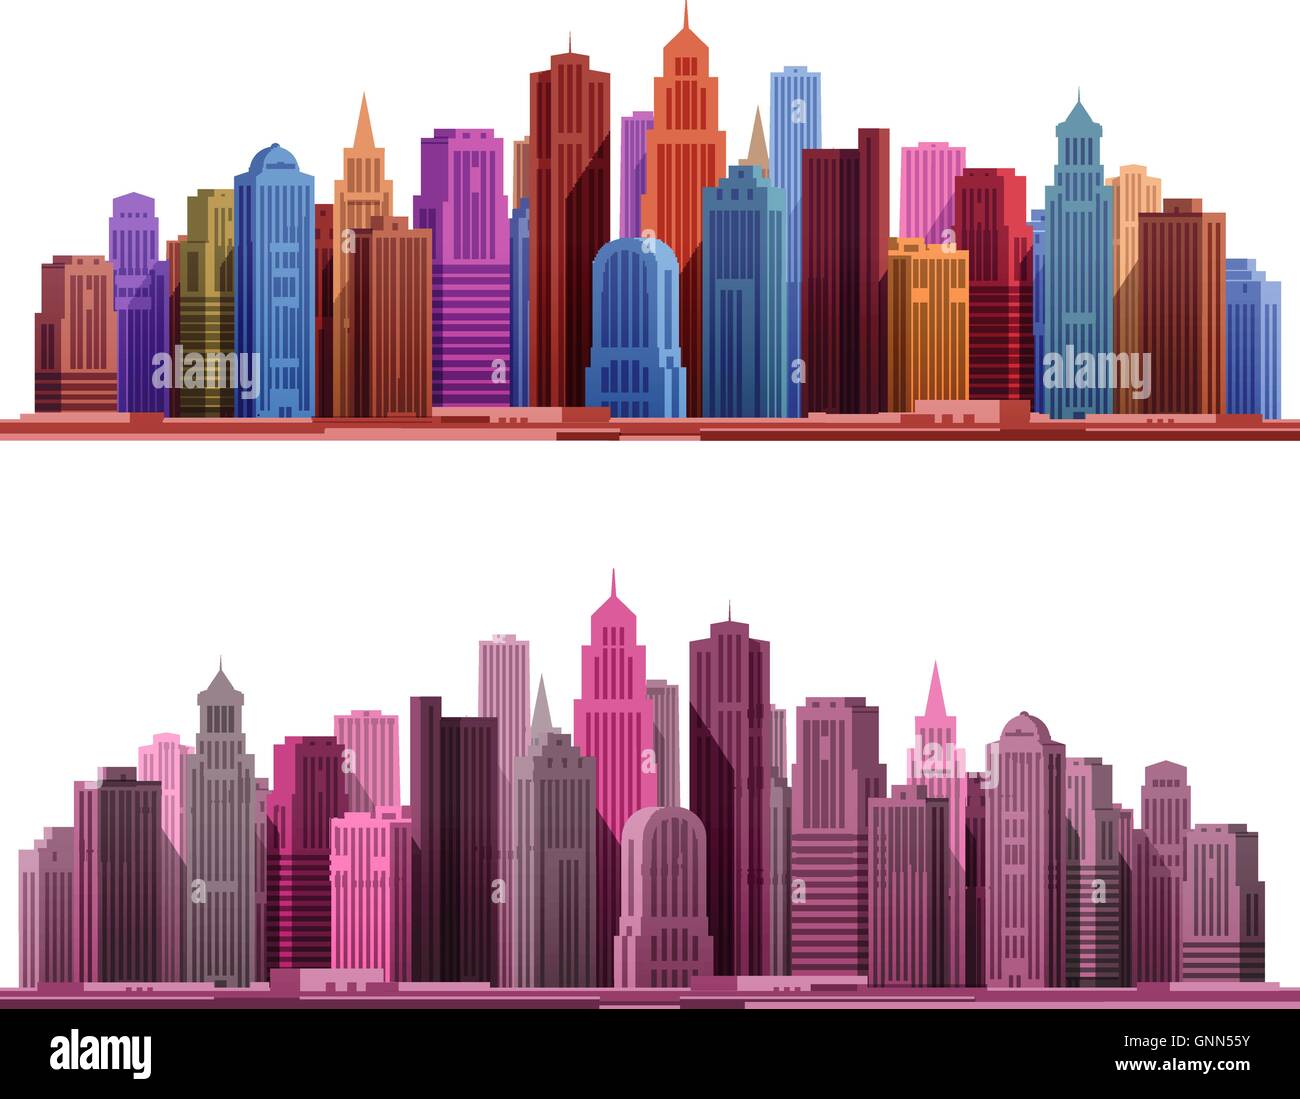 Big city with skyscrapers icons. Vector illustration Stock Vector